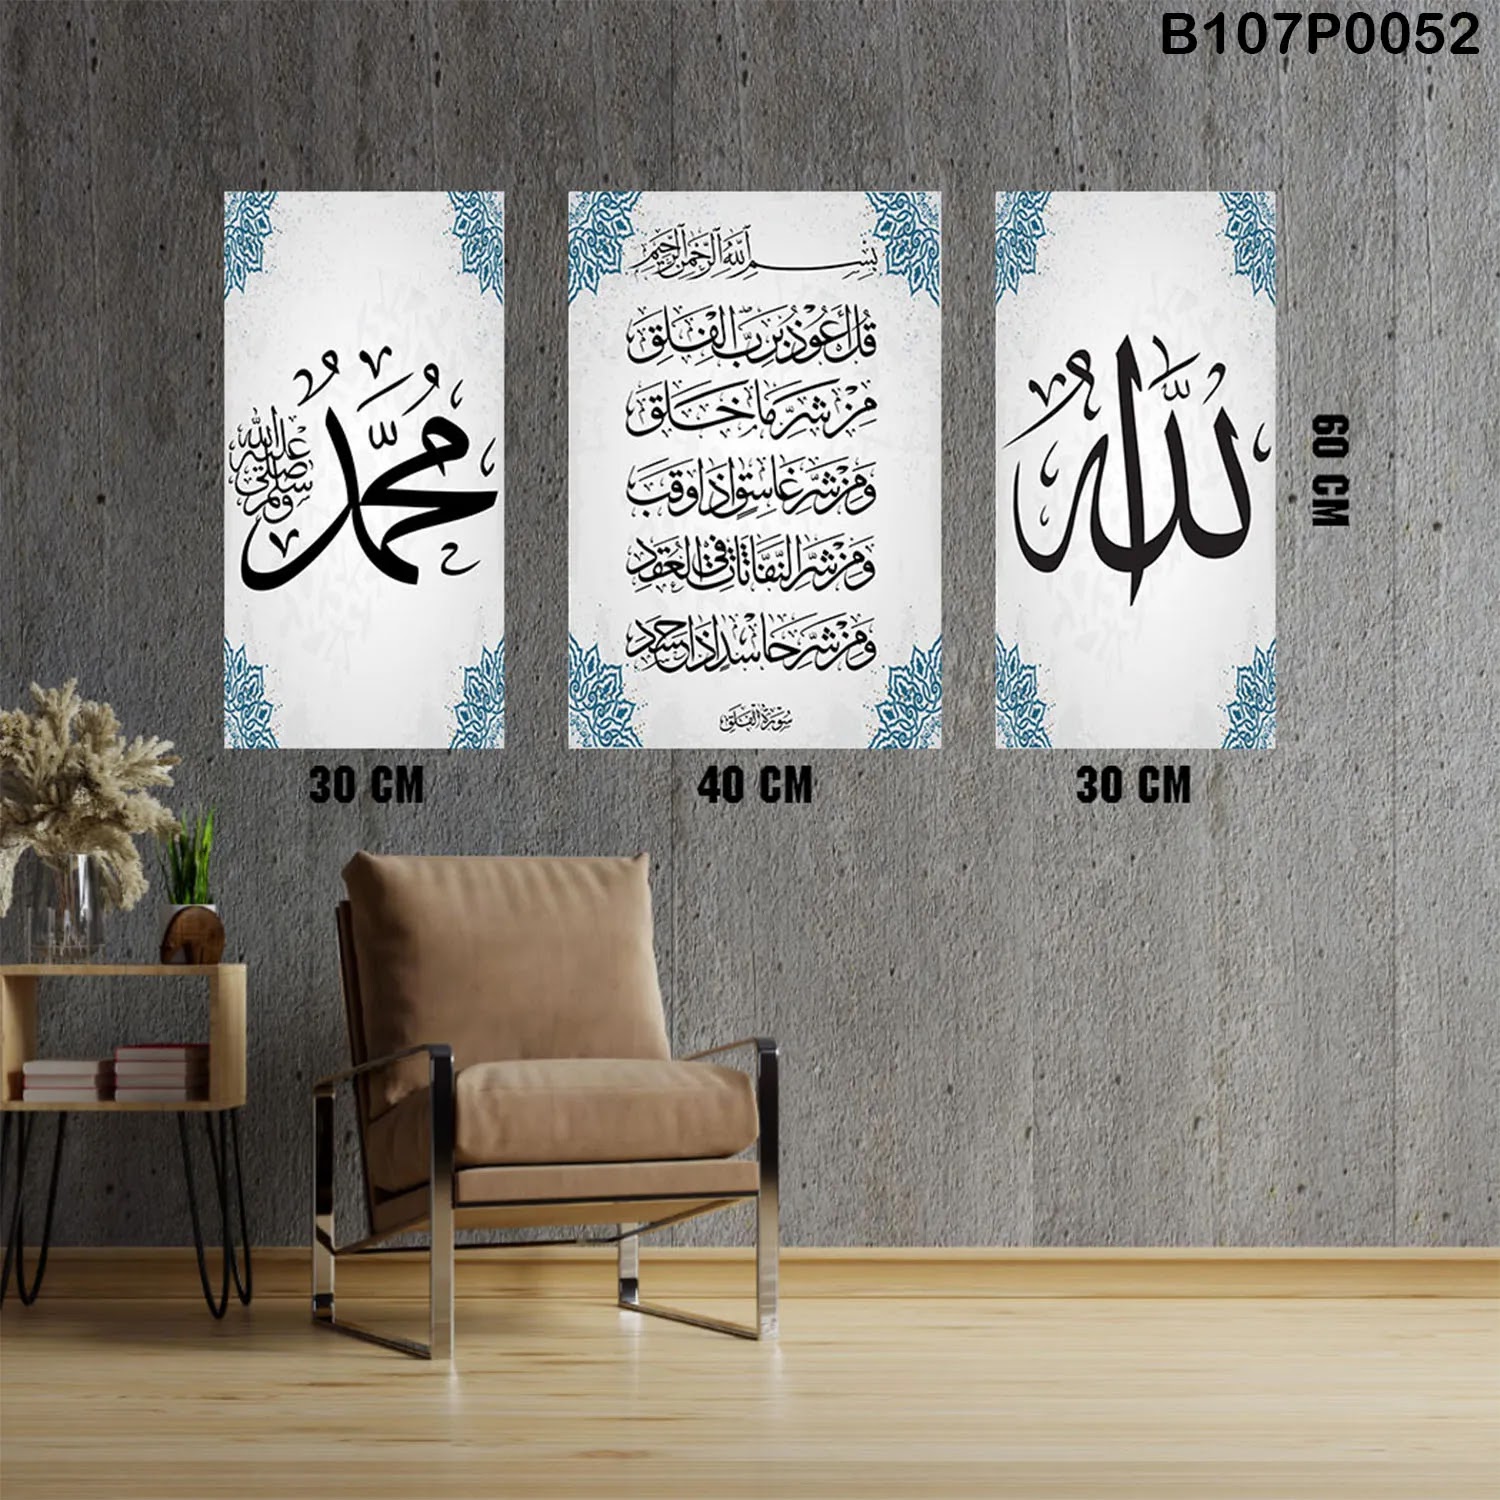 White Triptych panel with Arabic calligraphy (Allah - Quran - Mohammad)